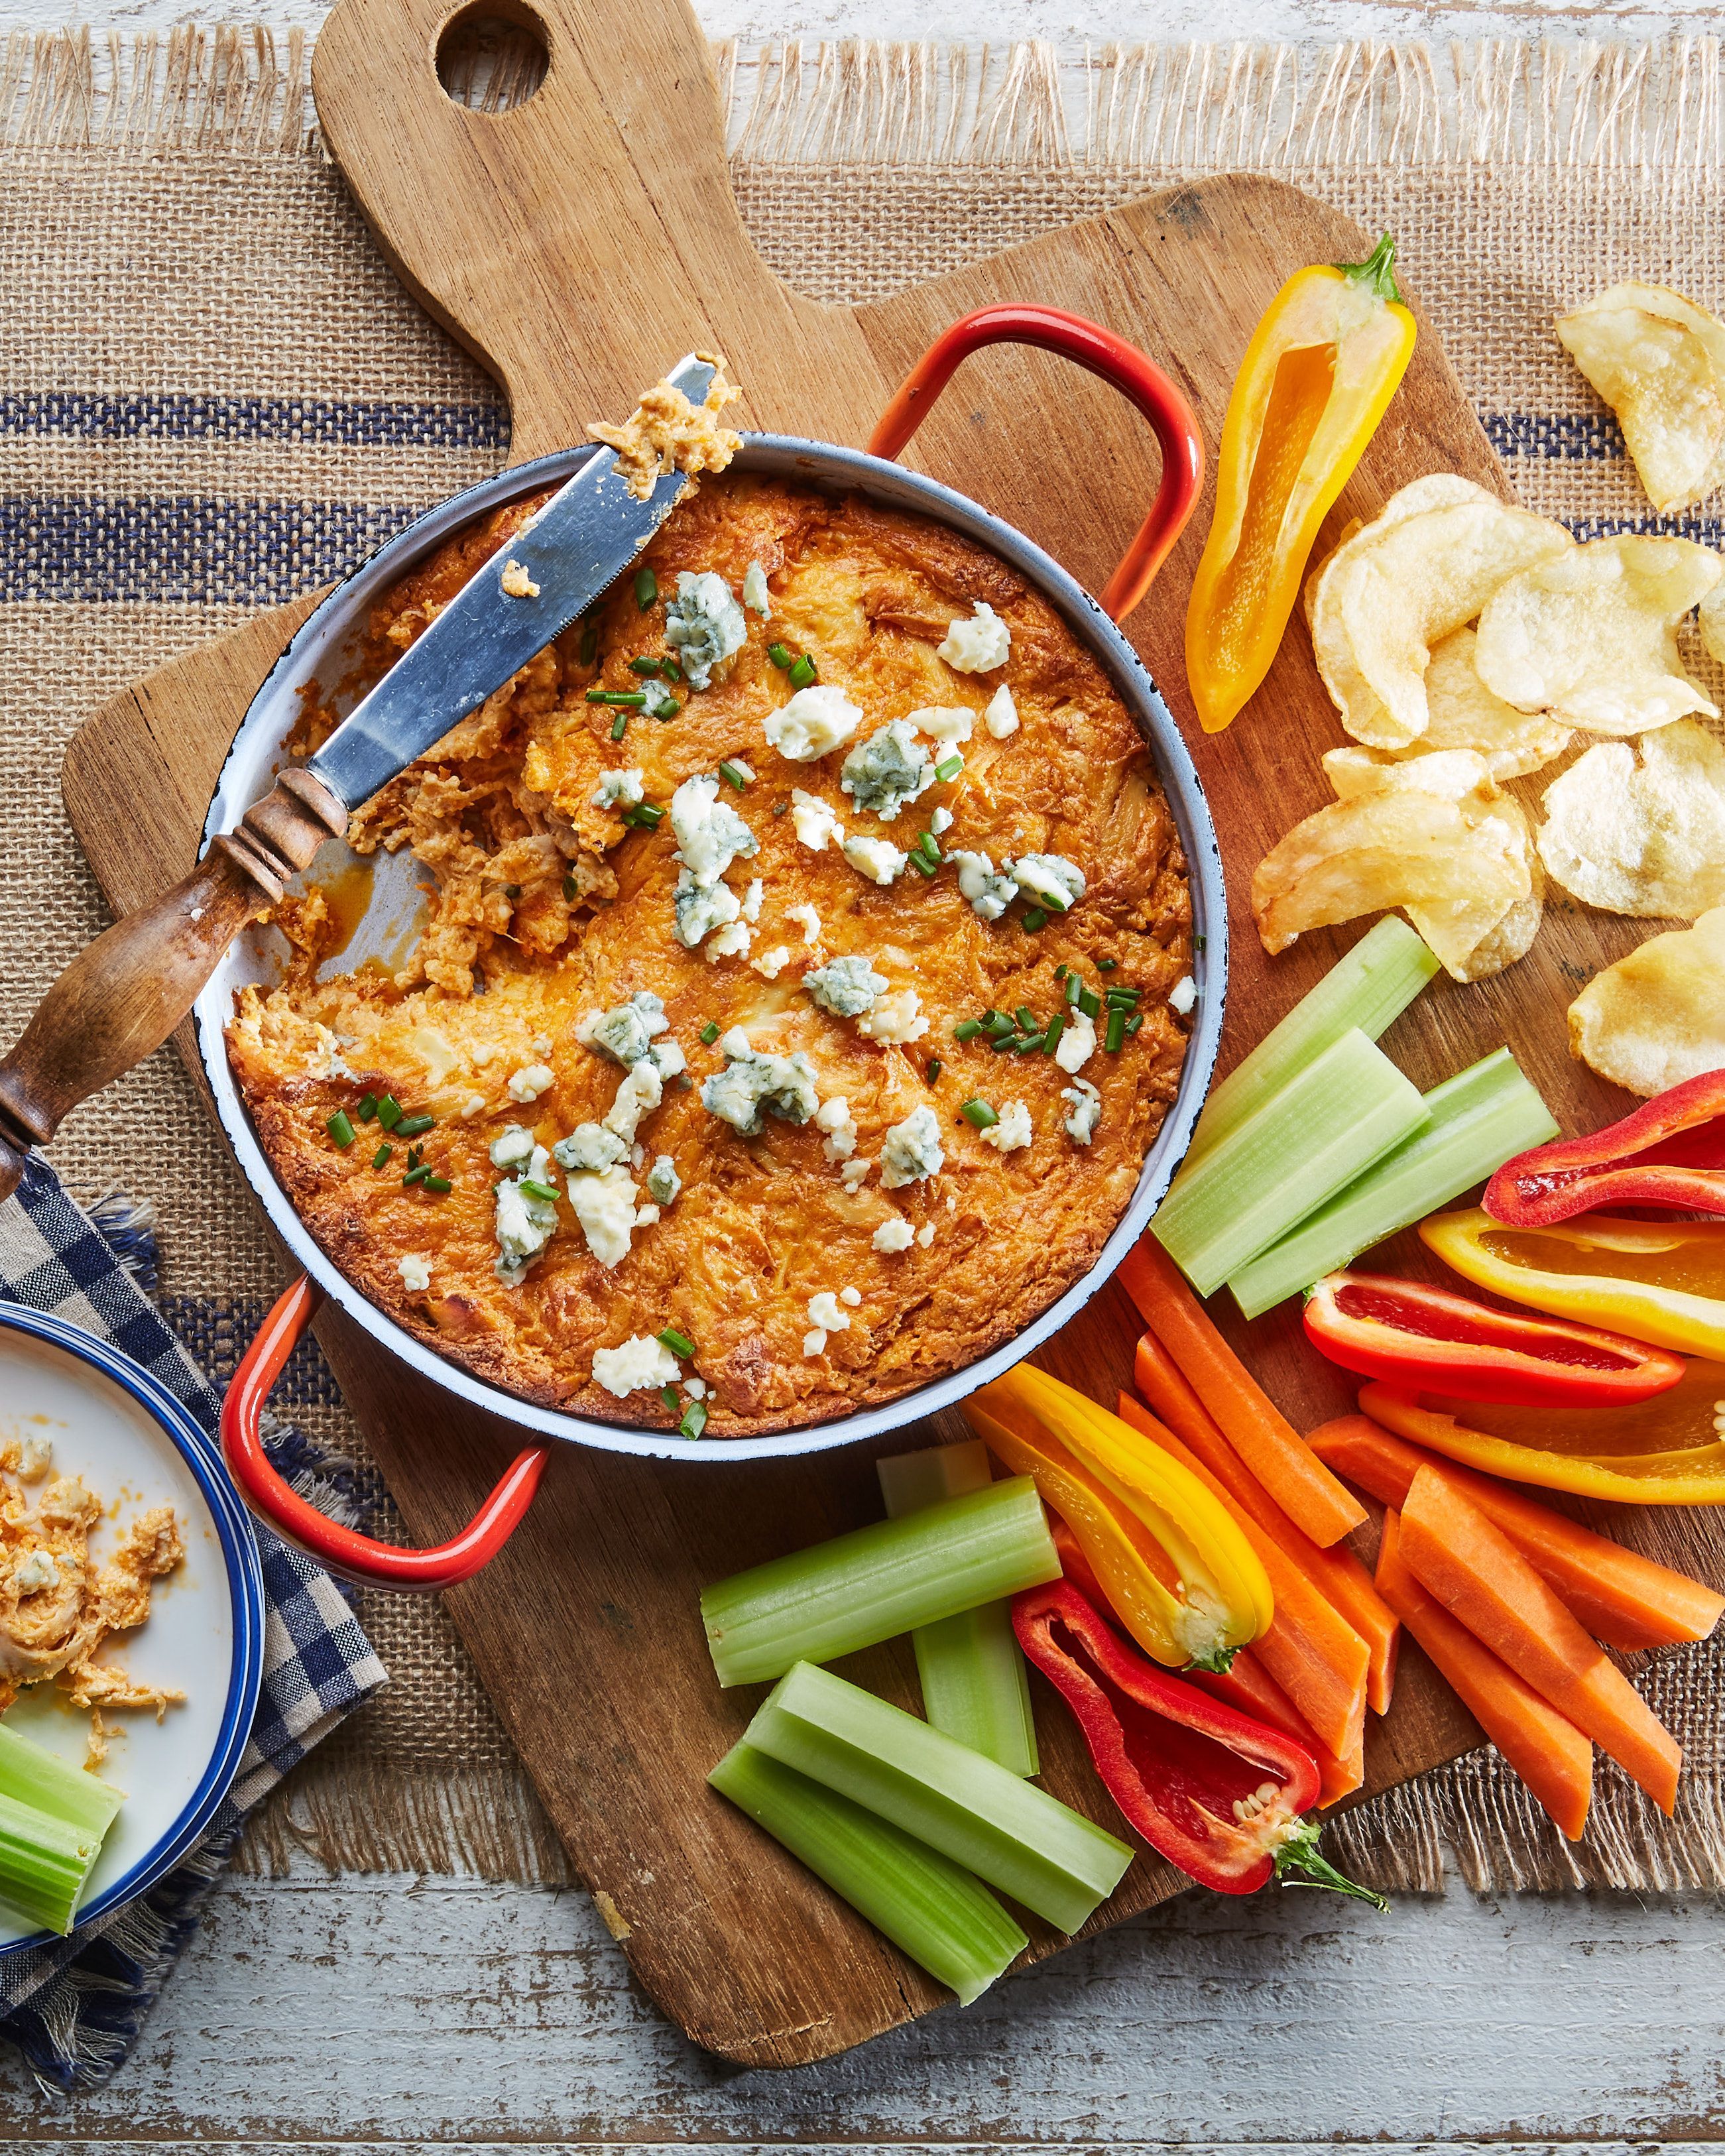 60 Best Dip Recipes for 2022